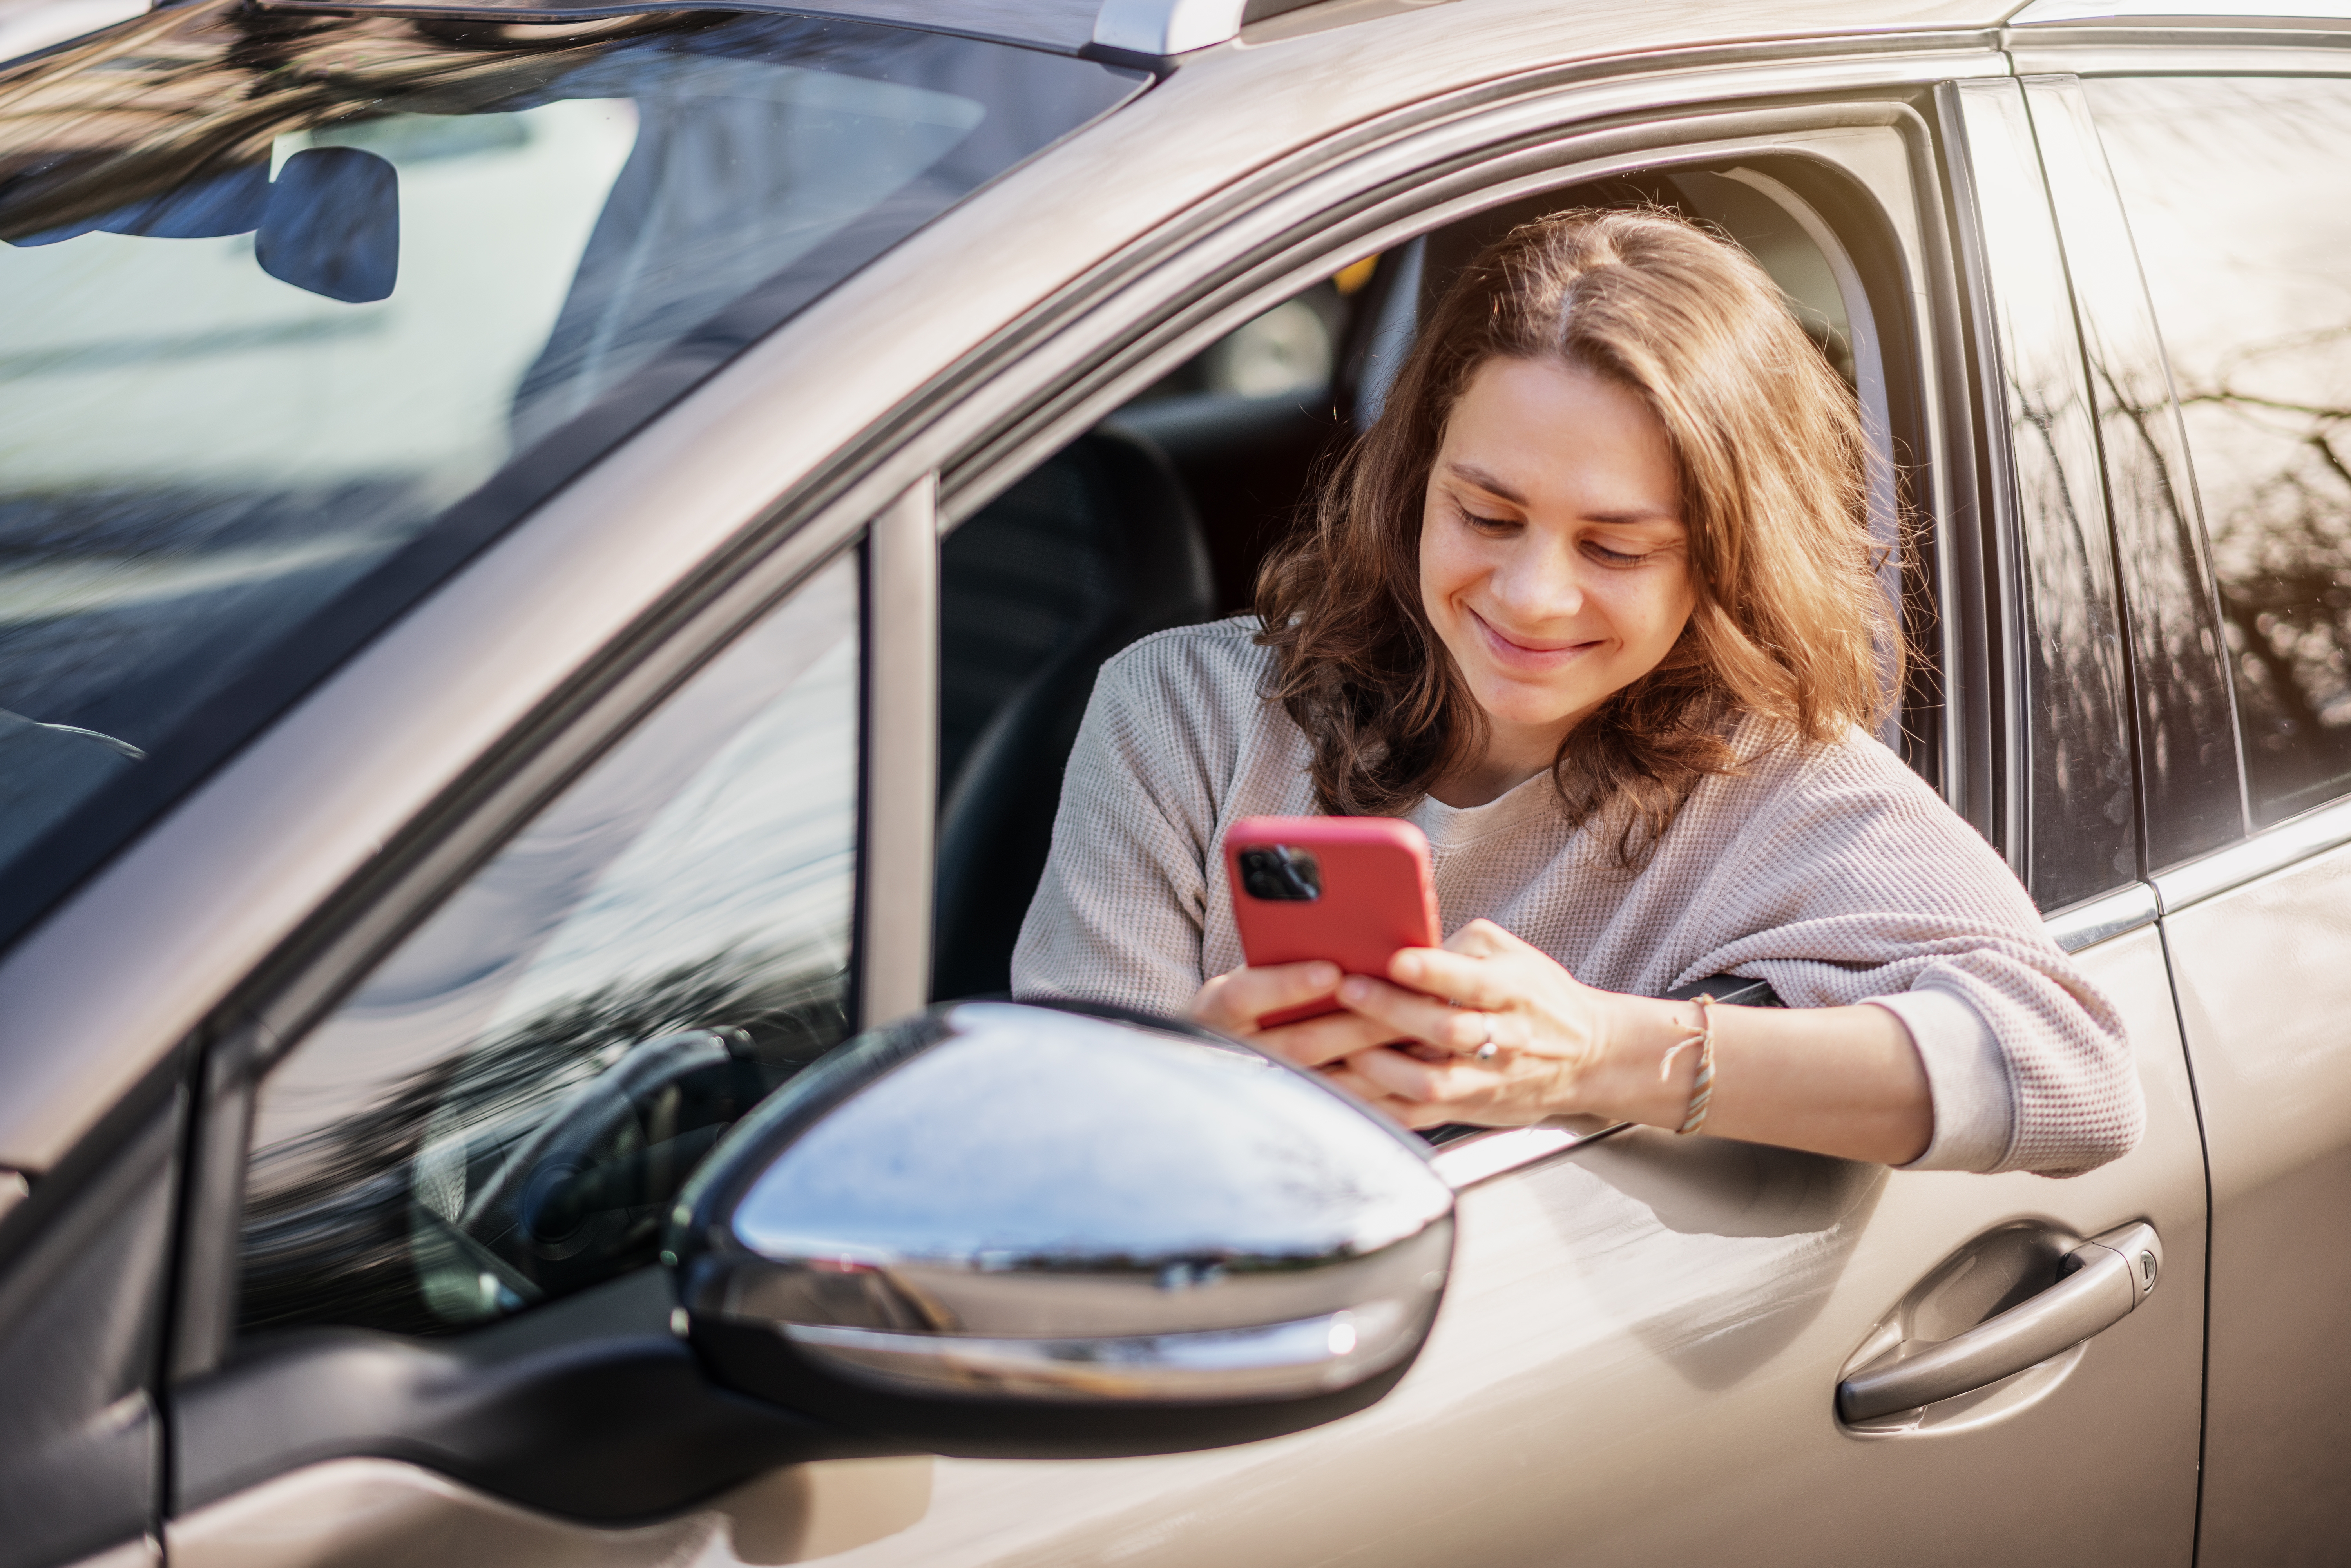 Cheerful young woman sitting in a car in the driver's seat looking into a smartphone, paying for parking and navigating in the city | Source: Shutterstock